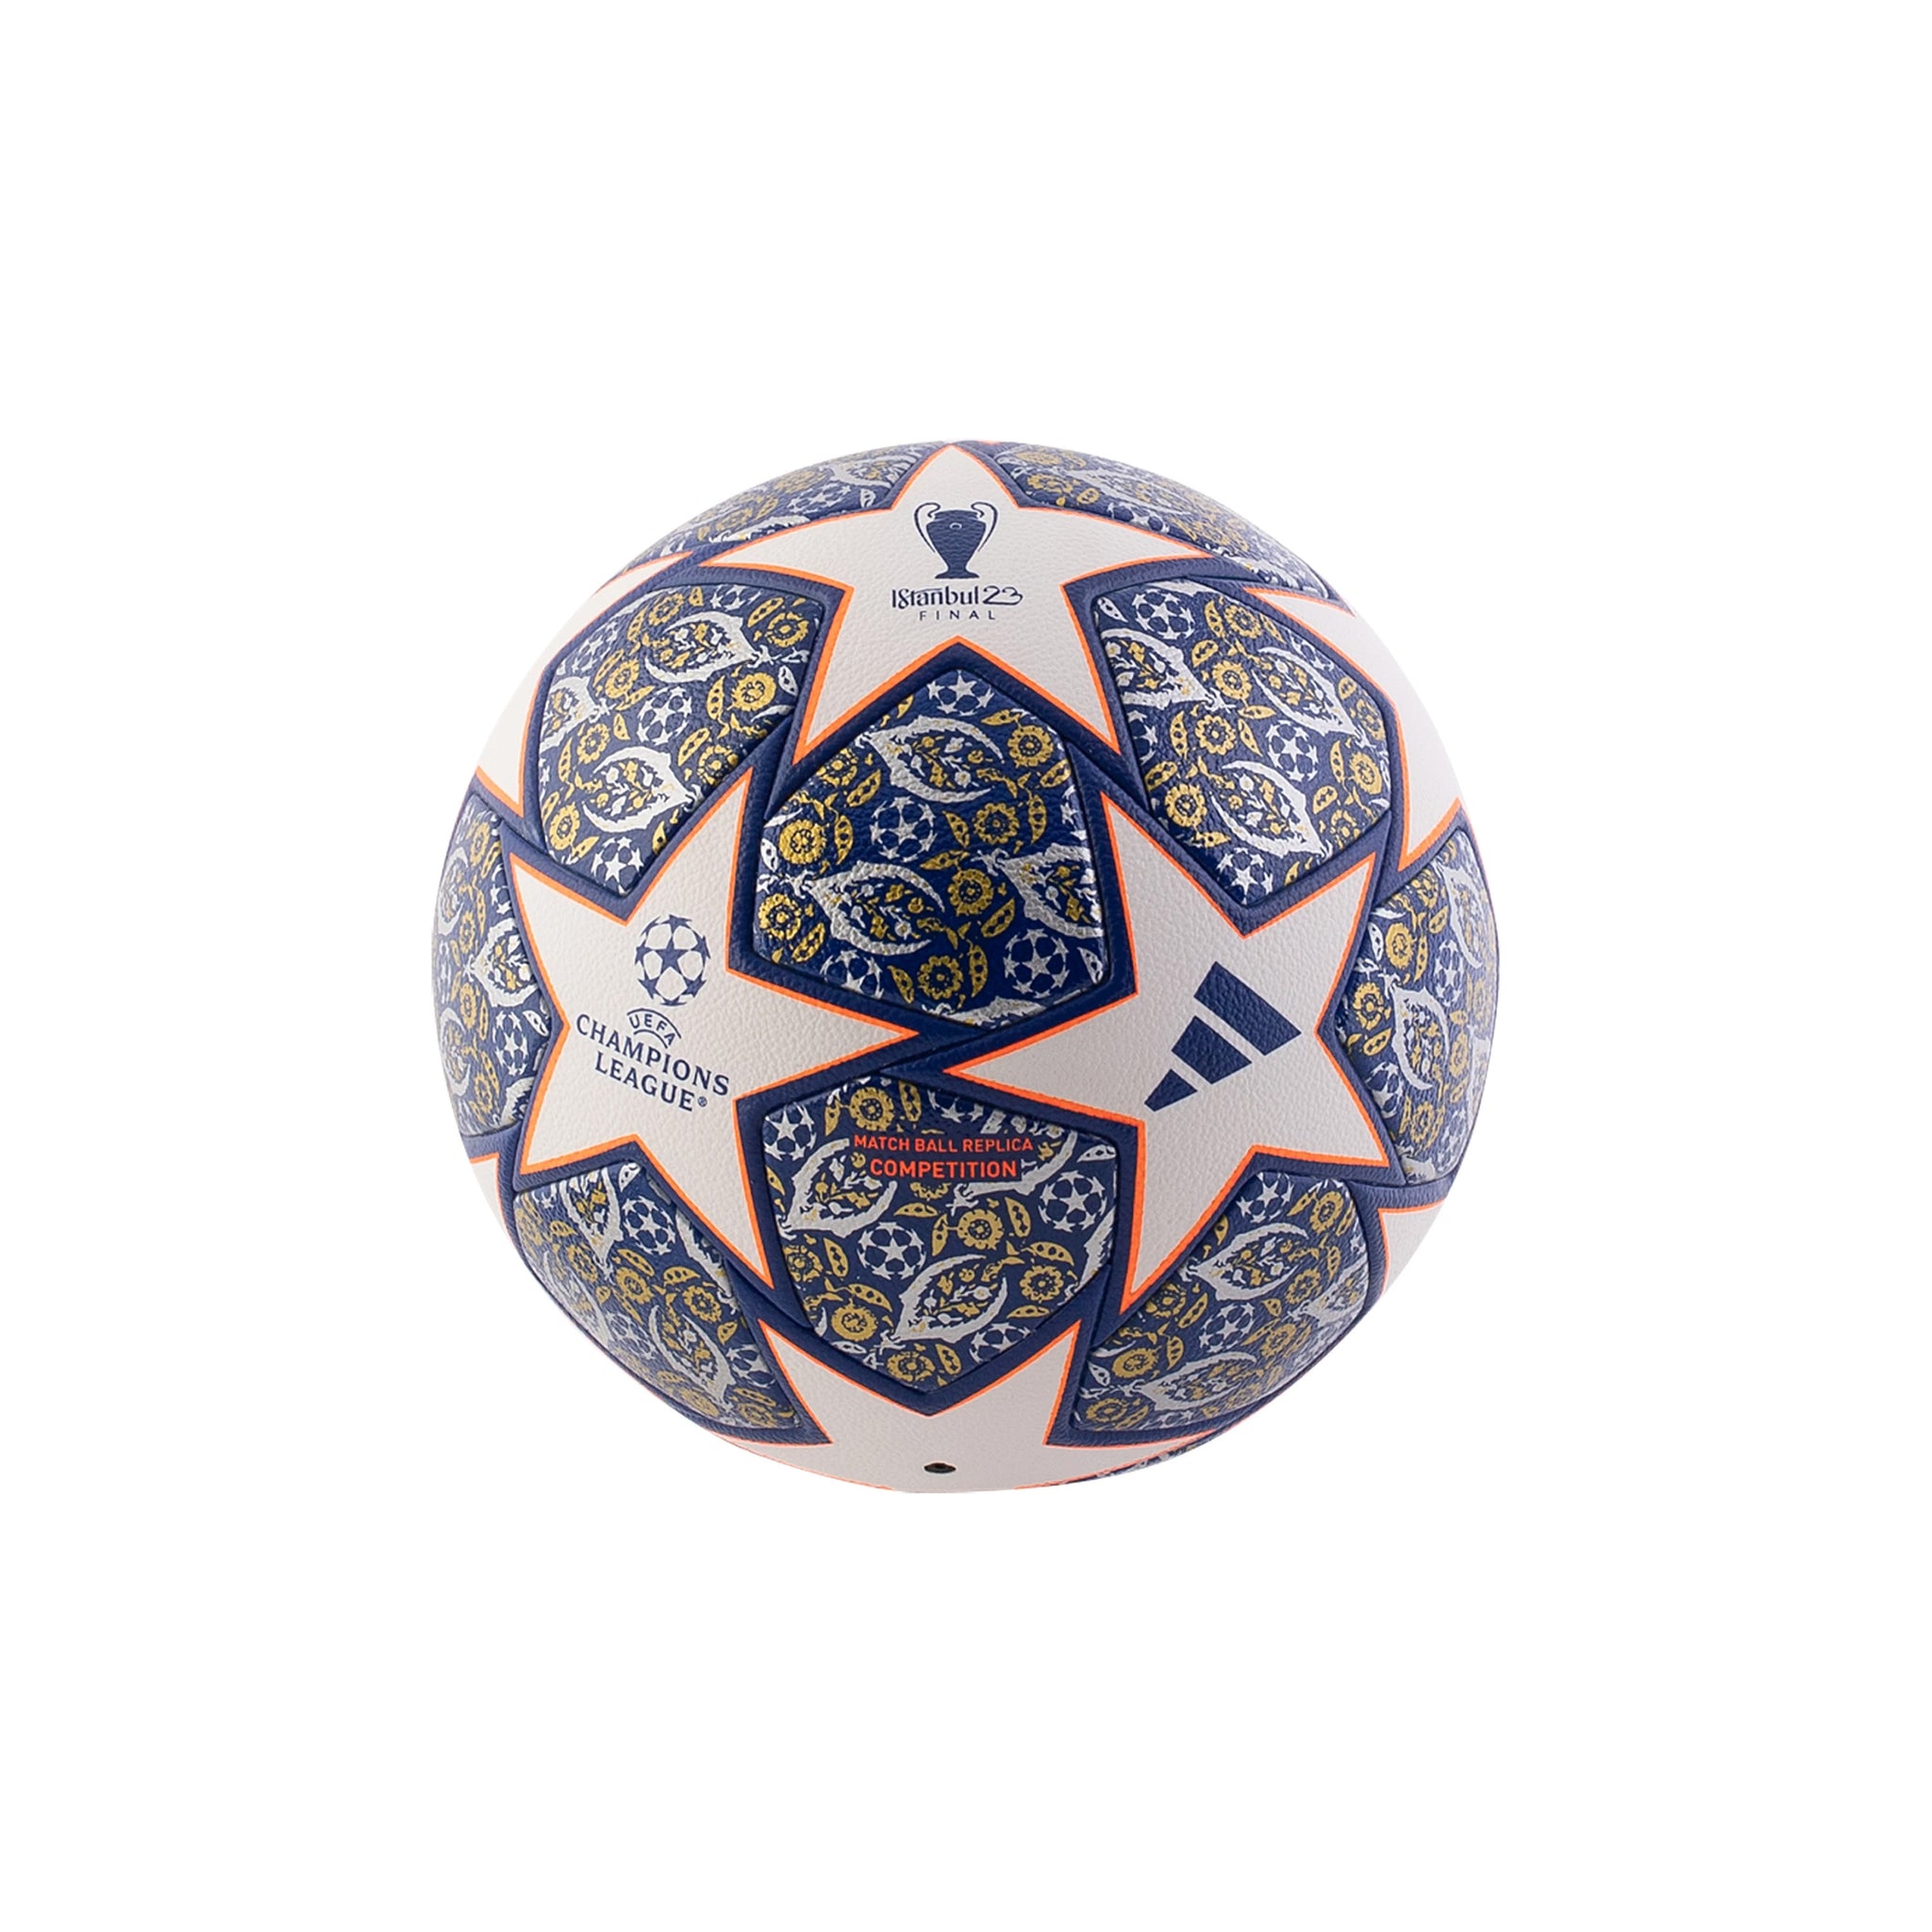 ADIDAS UCL Istanbul 23 Competition Ball